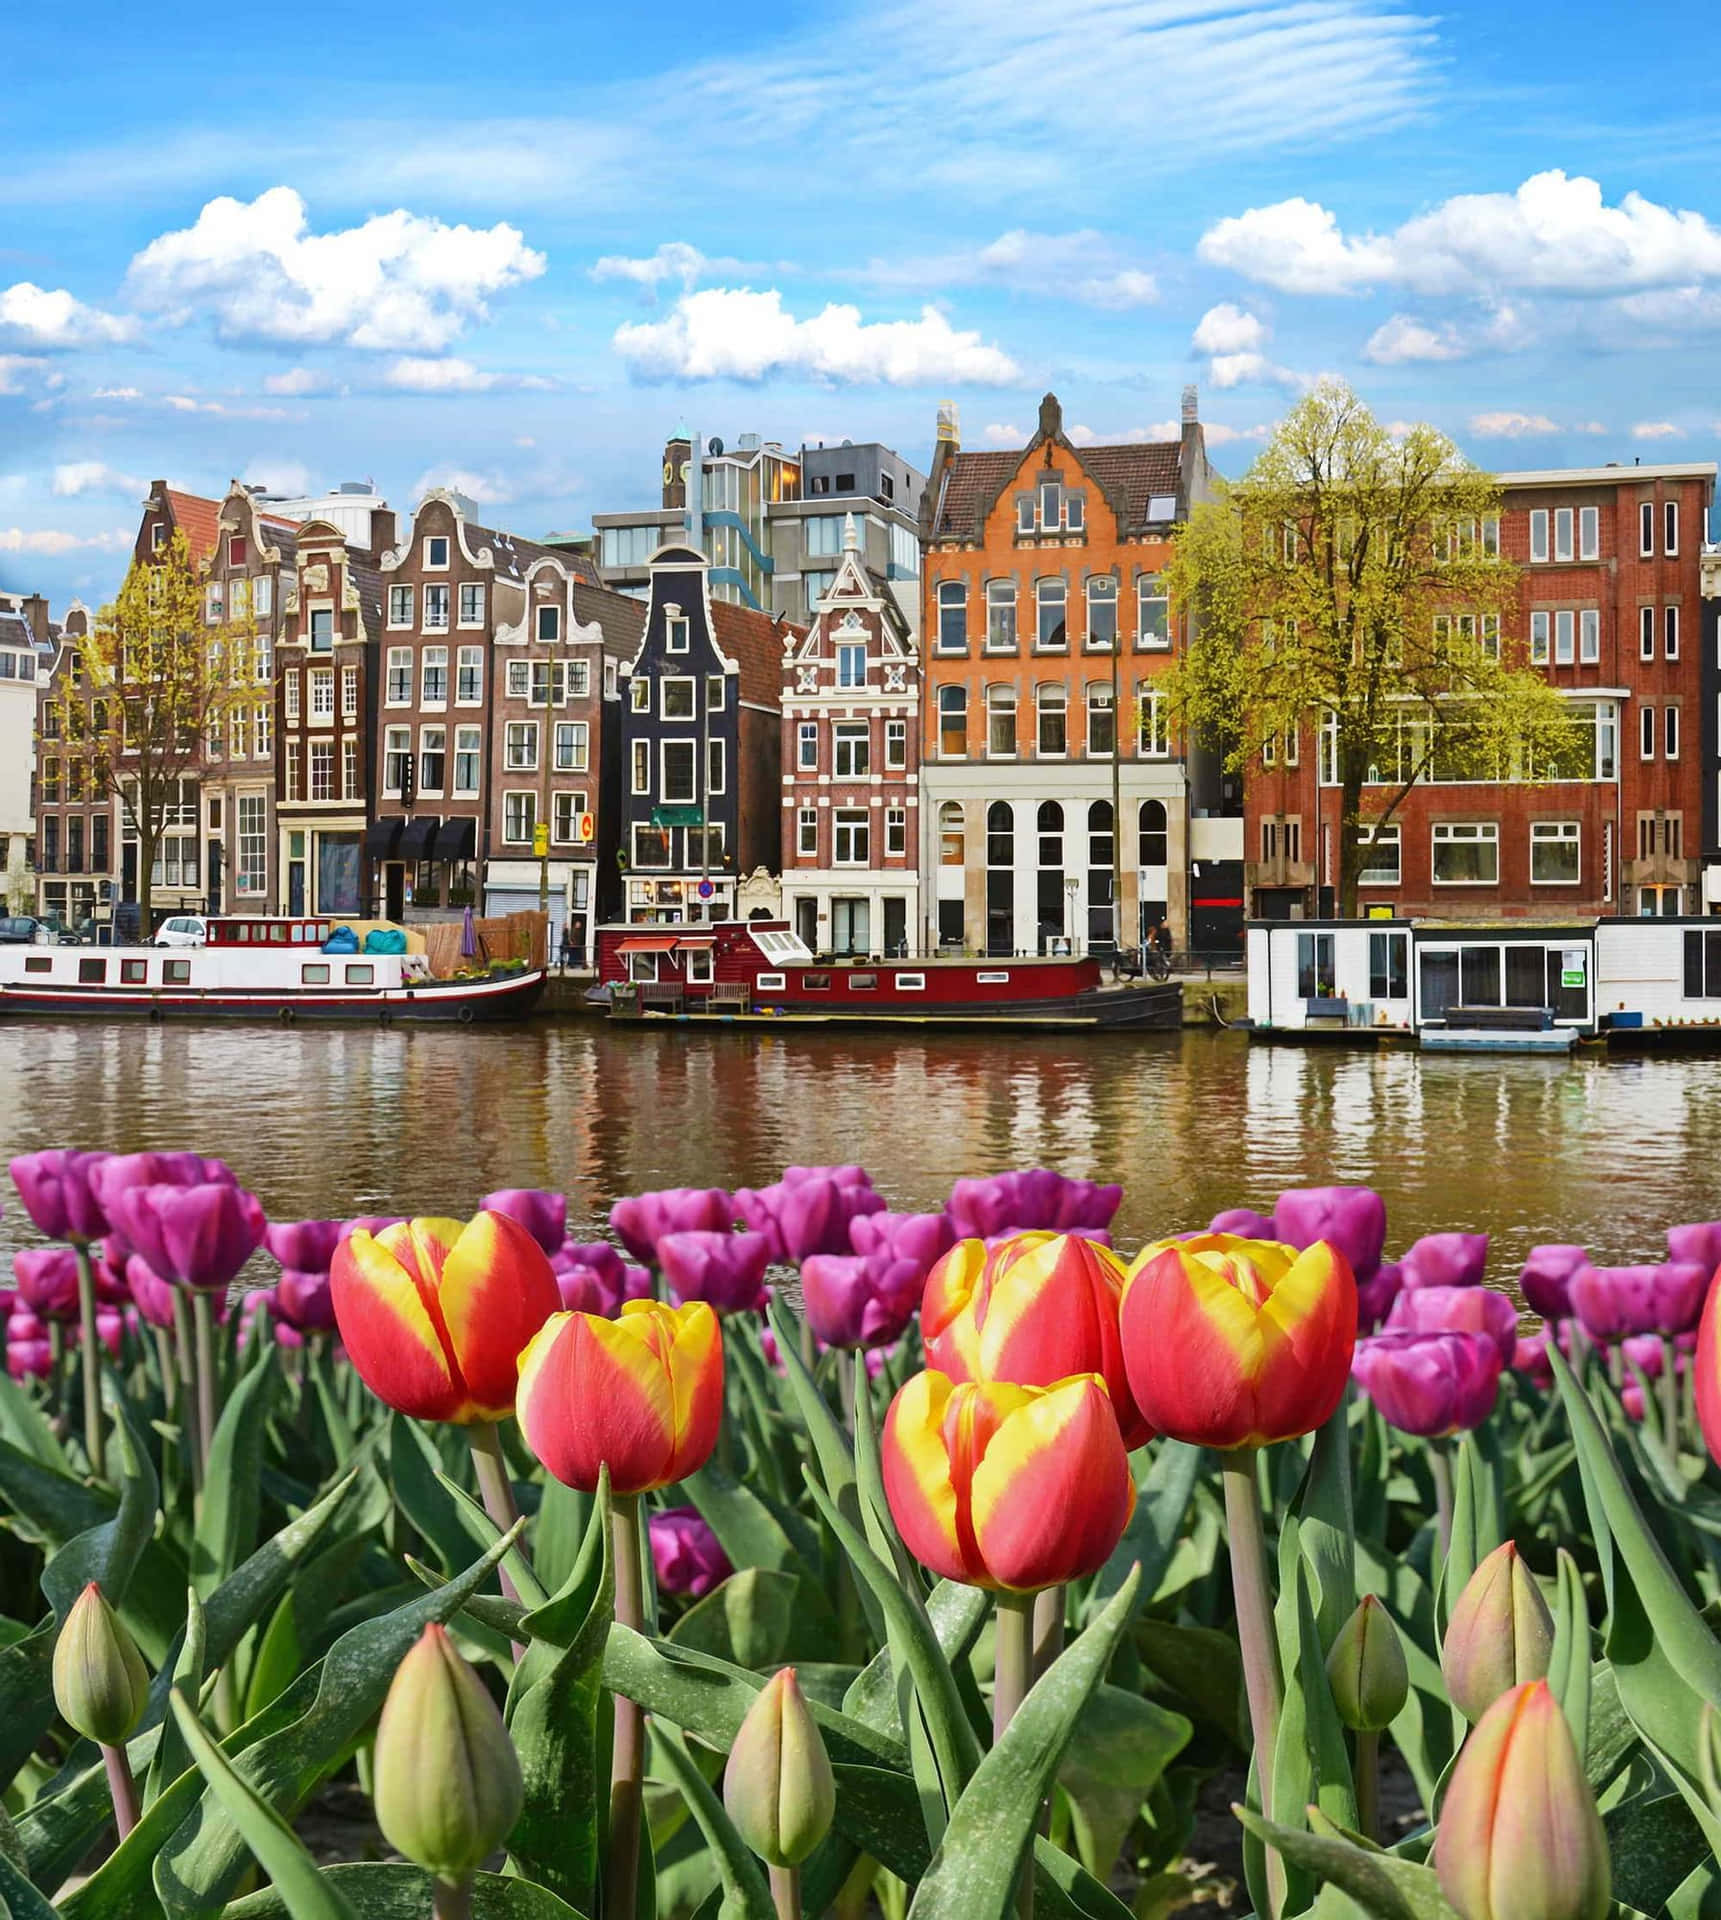 A scene resting on the waters of Amsterdam in springtime Wallpaper